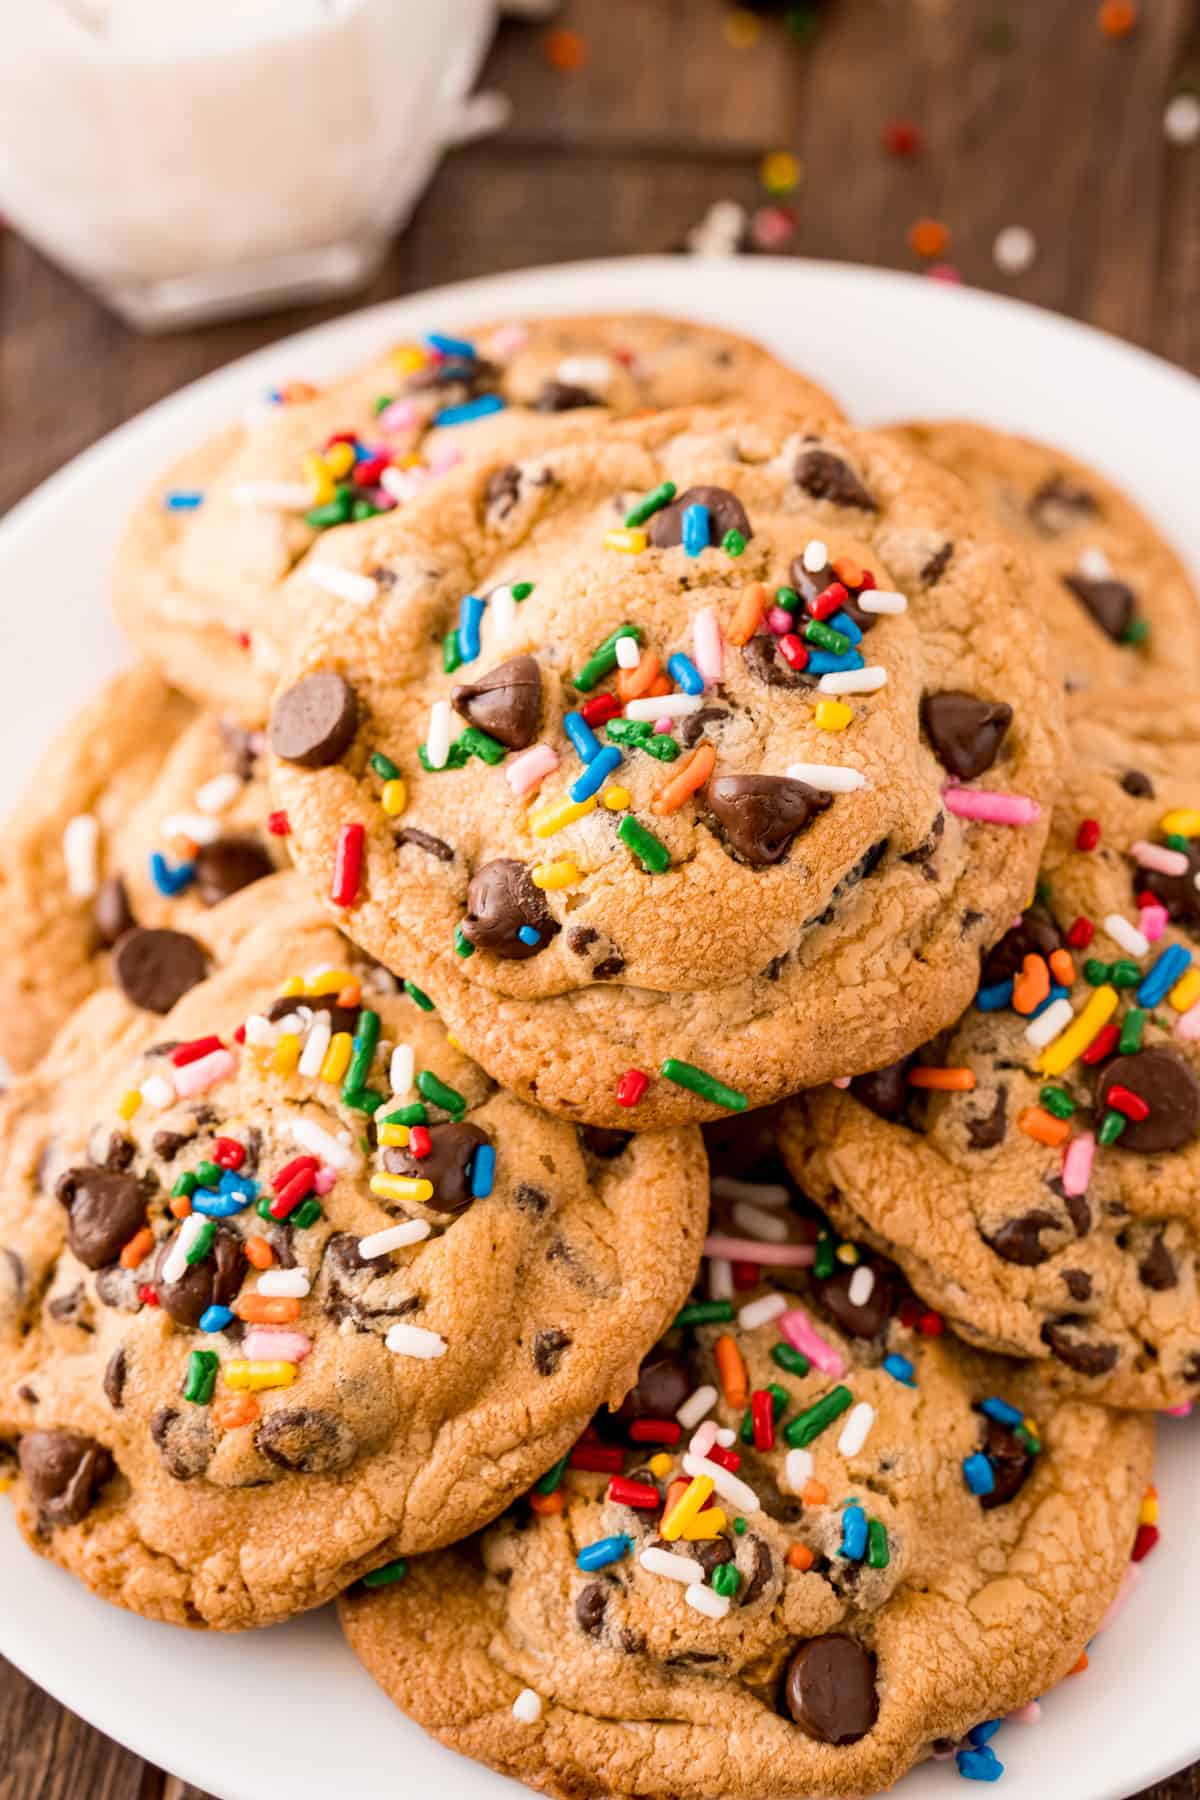 Overhead photo of cookies on white plate showing sprinkles and chocolate chips.